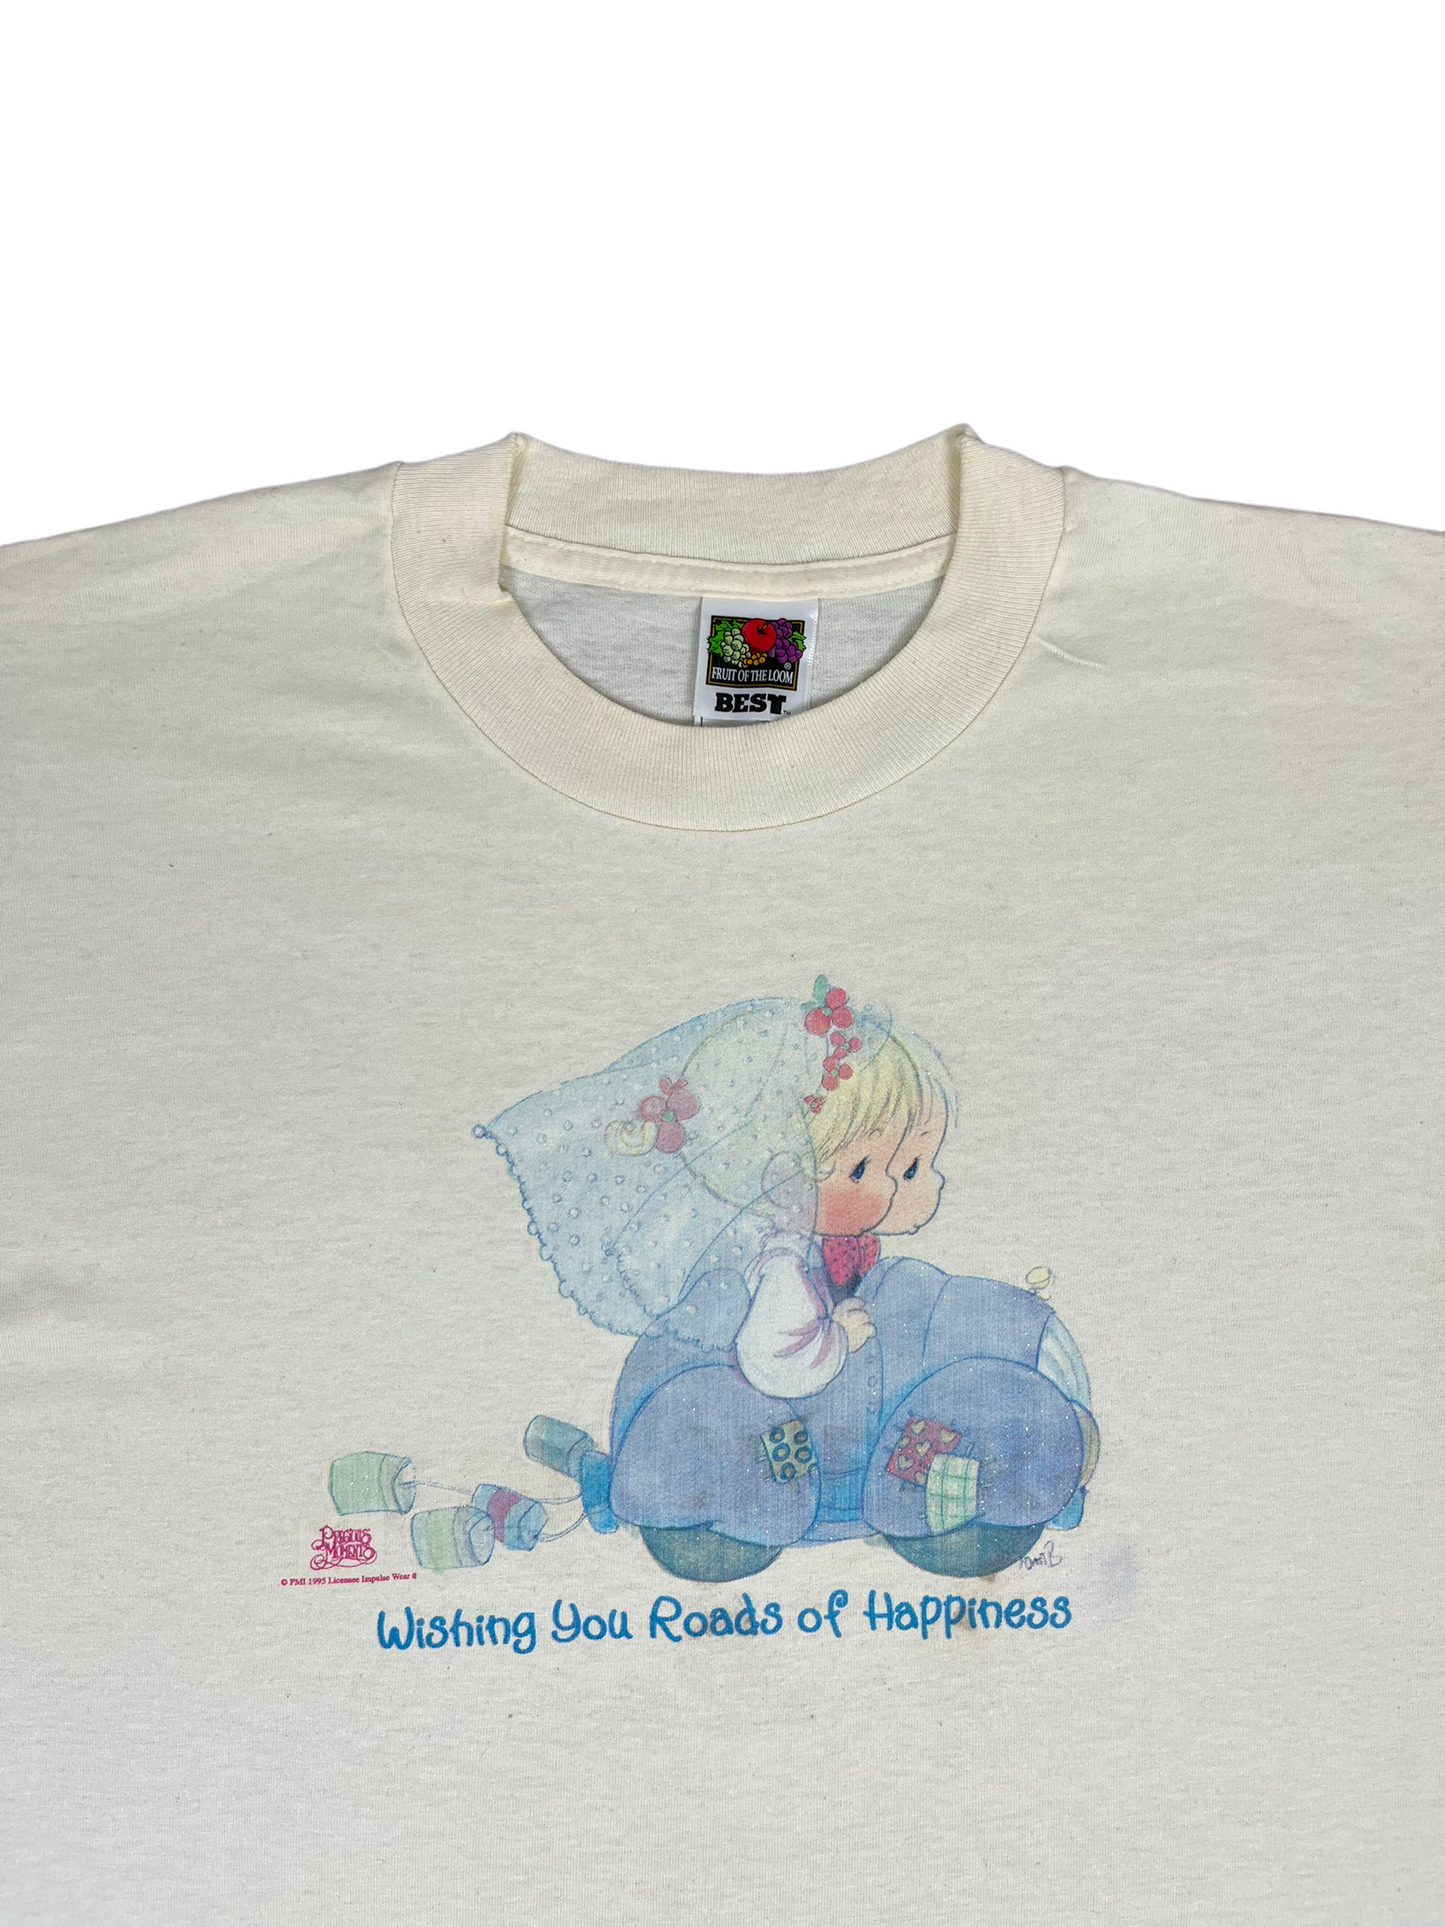 Vintage 1995 Wishing You Roads Of Happiness T Shirt - Large